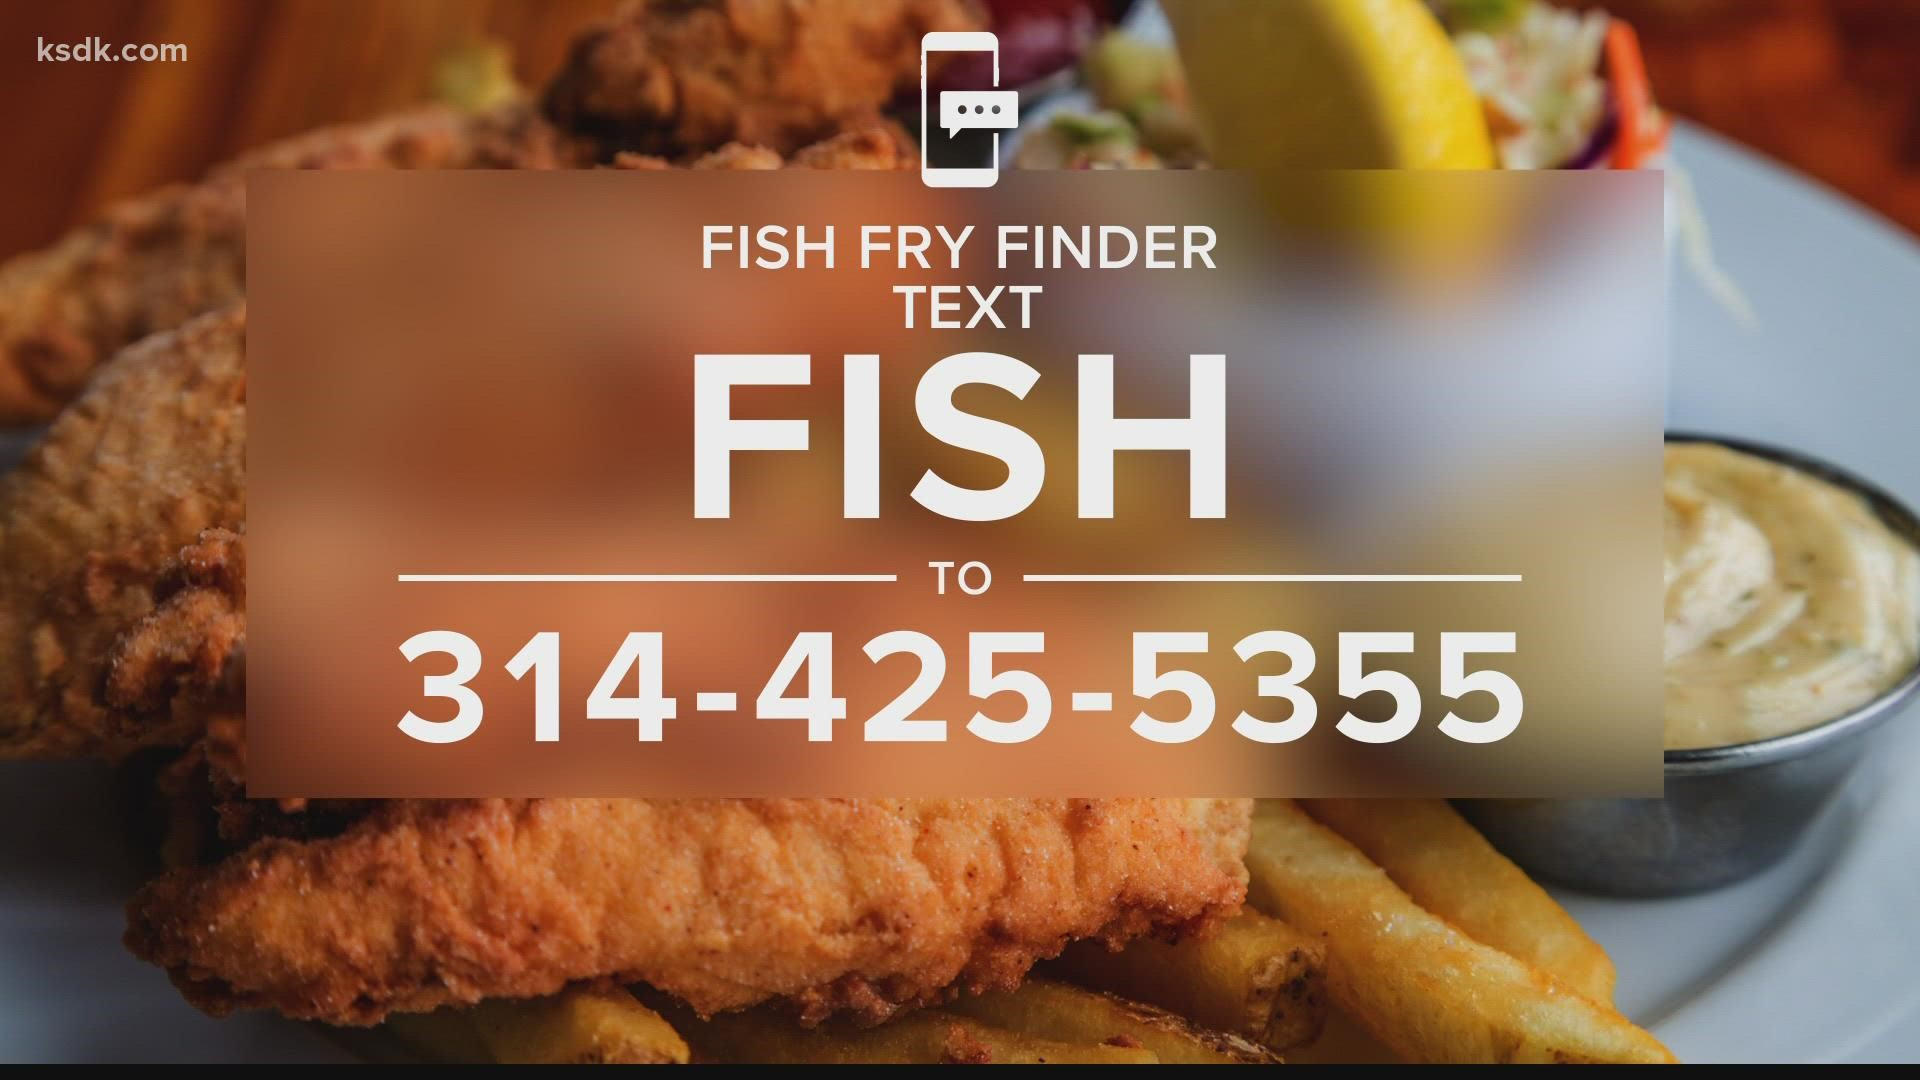 Lent is here, and that means dozens of fish fries to choose from in the St. Louis area.